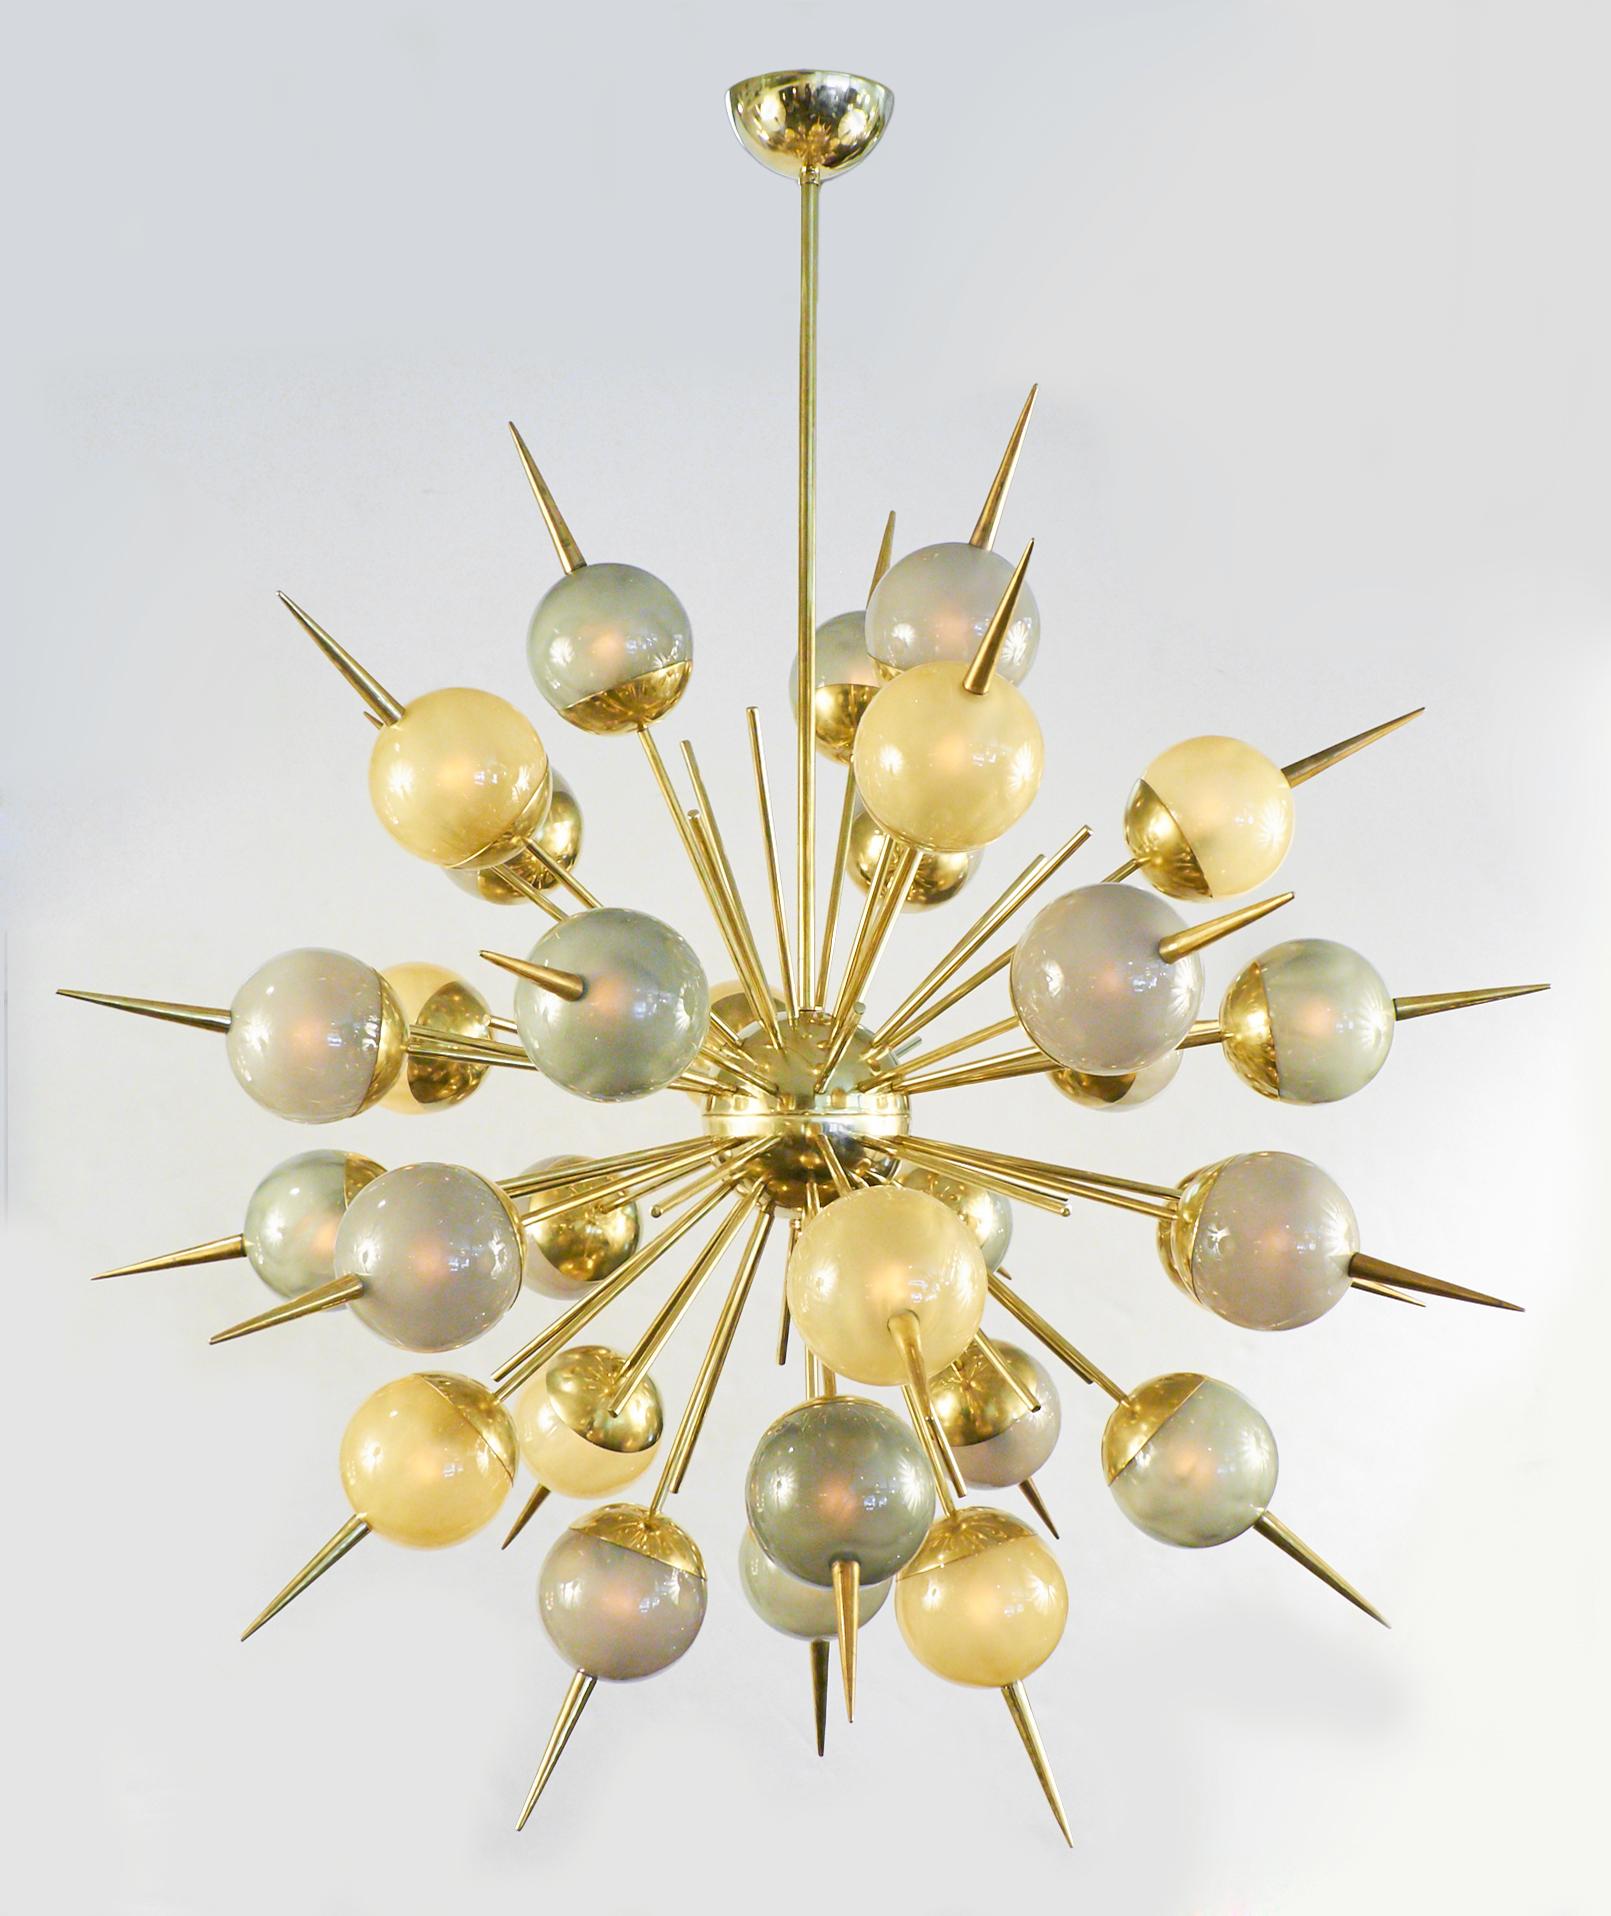 Mid-Century Modern style Murano glass and brass chandelier with an array of thirty globes in gold, green, and purple Murano glass on brass rods with spikes. Each globe is lit from within on this striking Sputnik style light fixture. Holds thirty